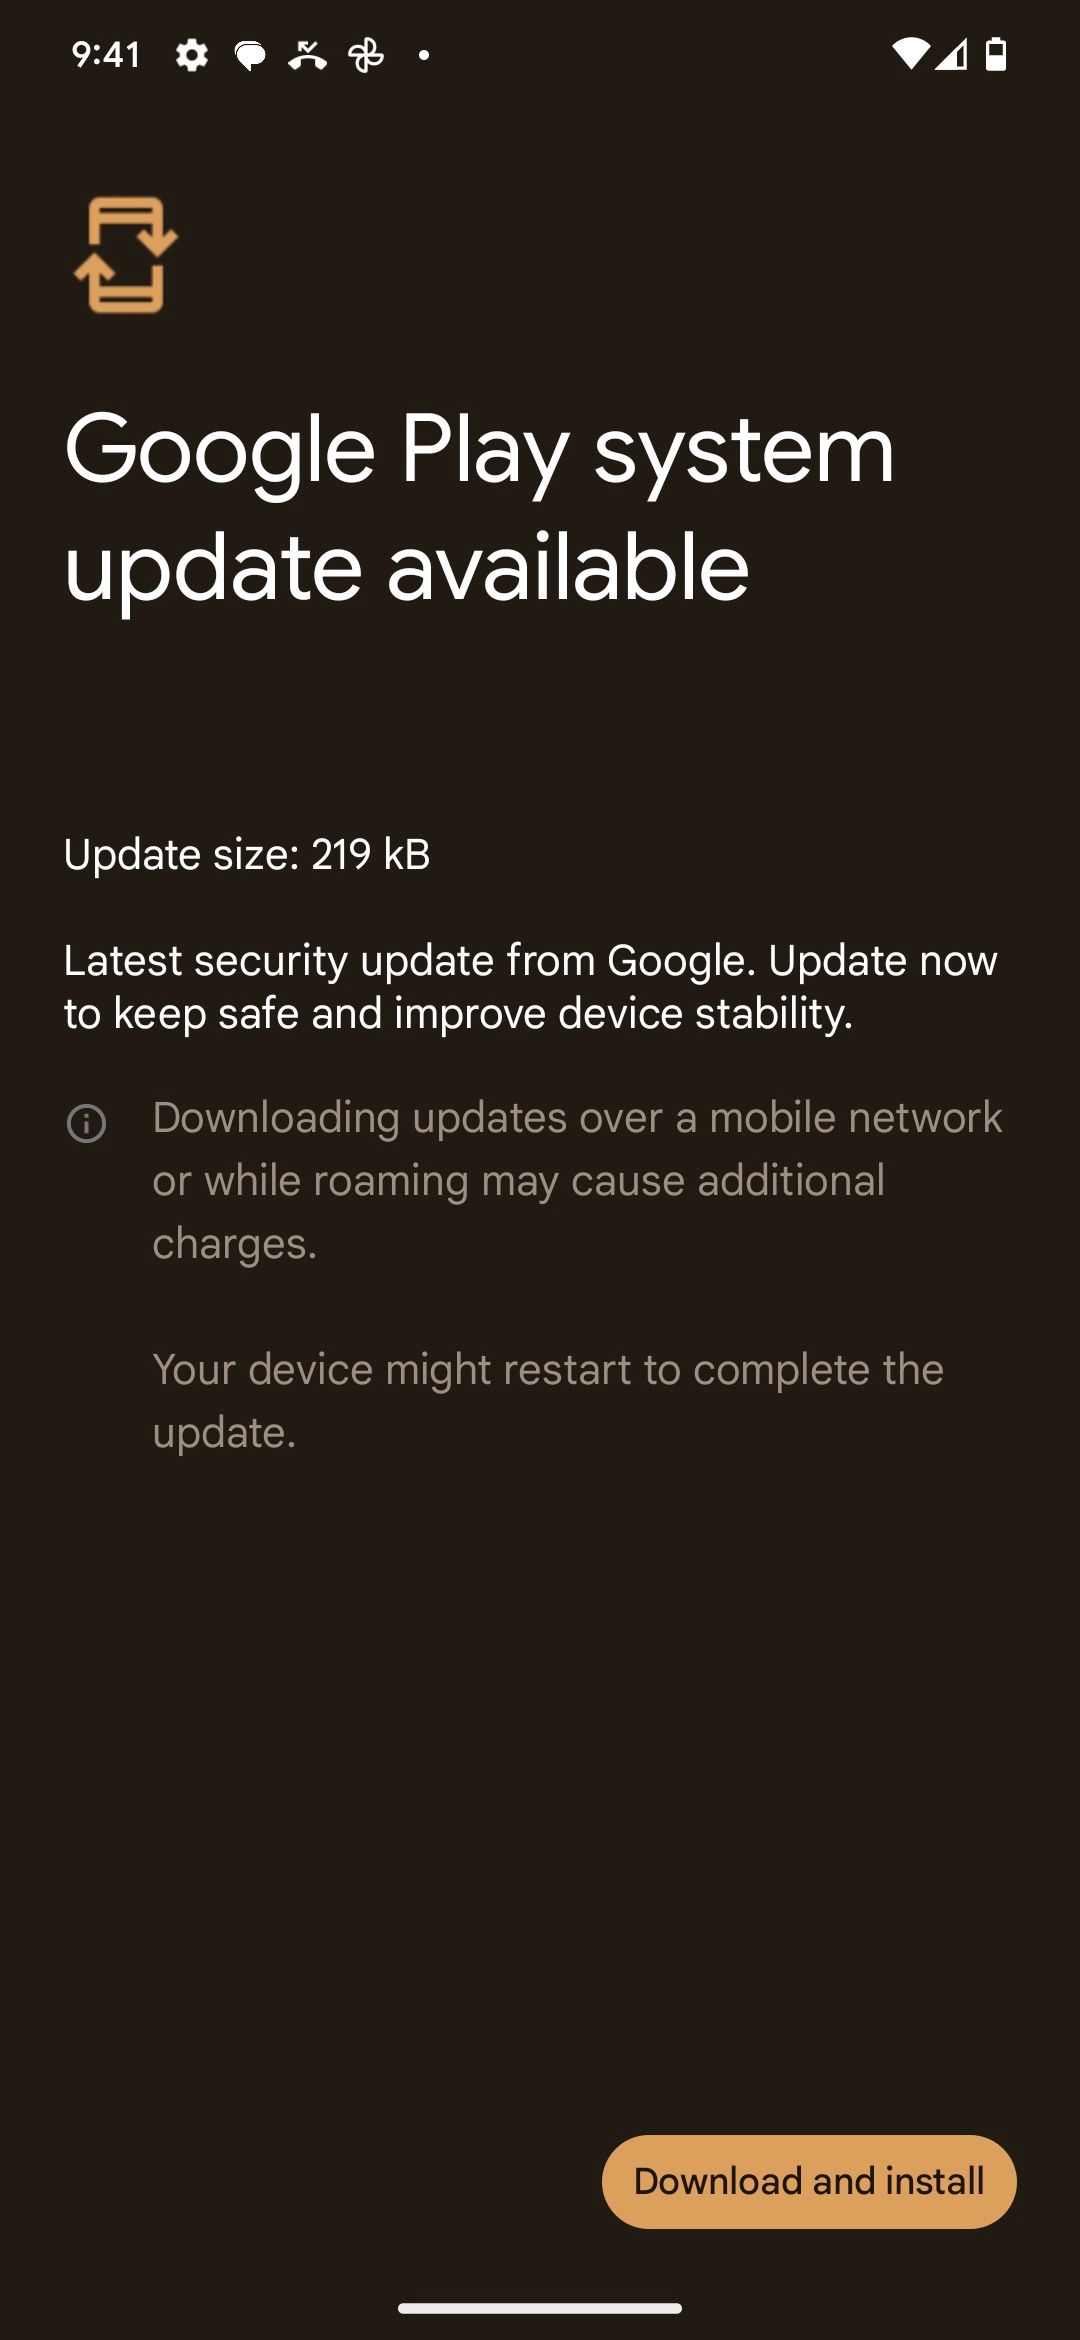 Google Play install system update